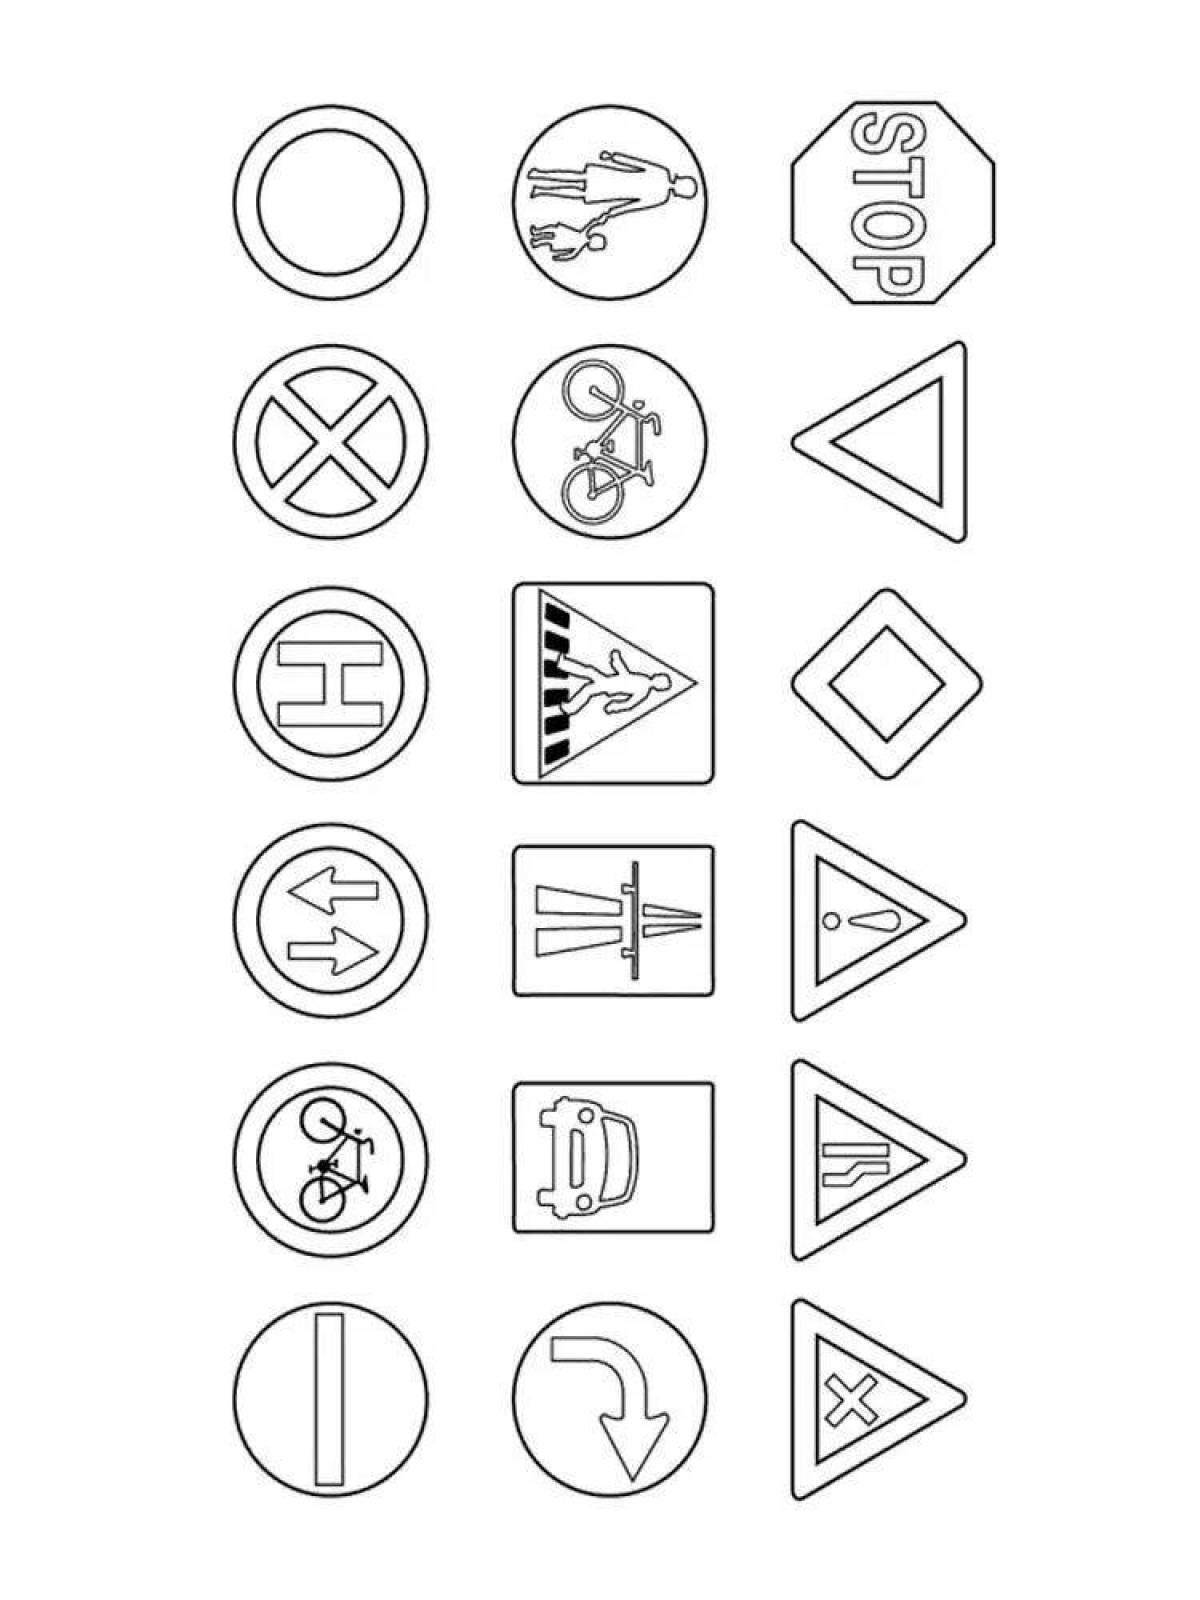 Coloring page bright icons